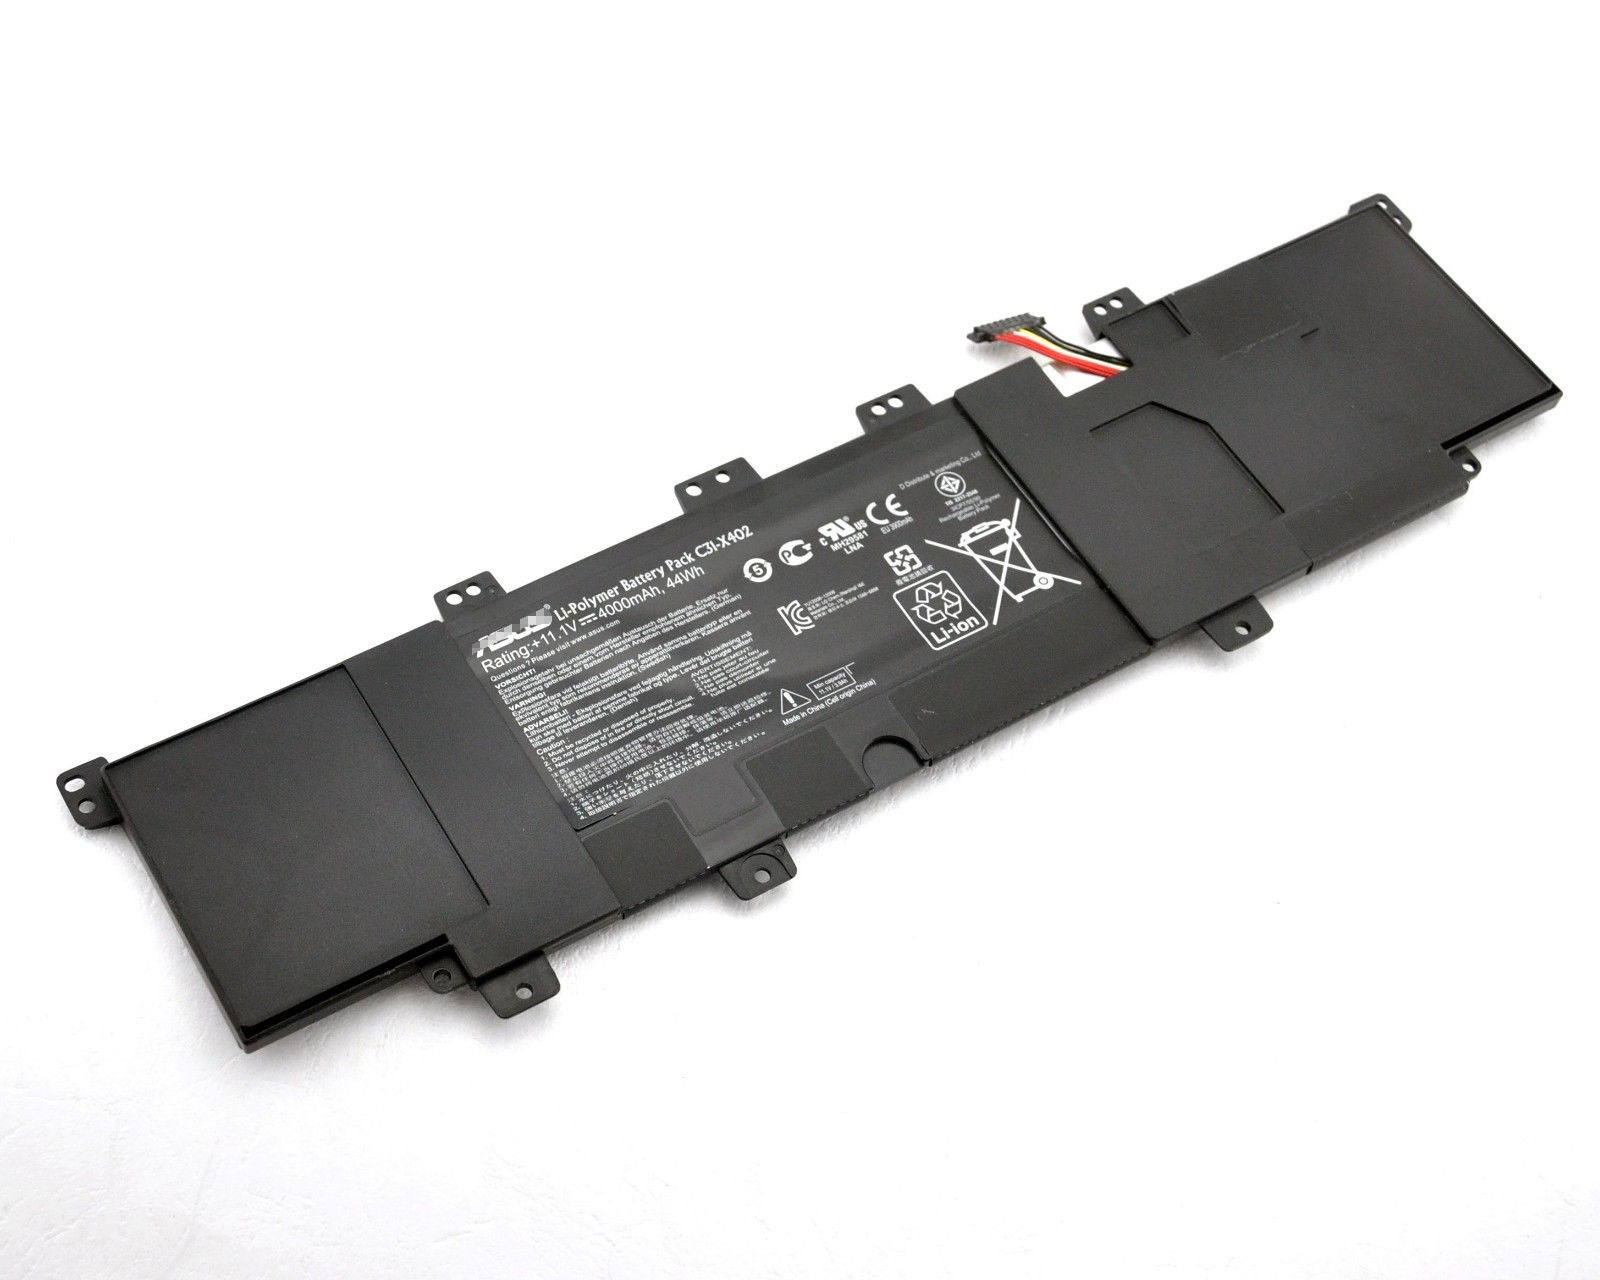 ASUS VivoBook S300C S300CA X402CA S400CA S400E-Asus-BATAS05201A-BATAS05201A-Laptop Batteries | LaptopSA.co.za a division of the notebook company 